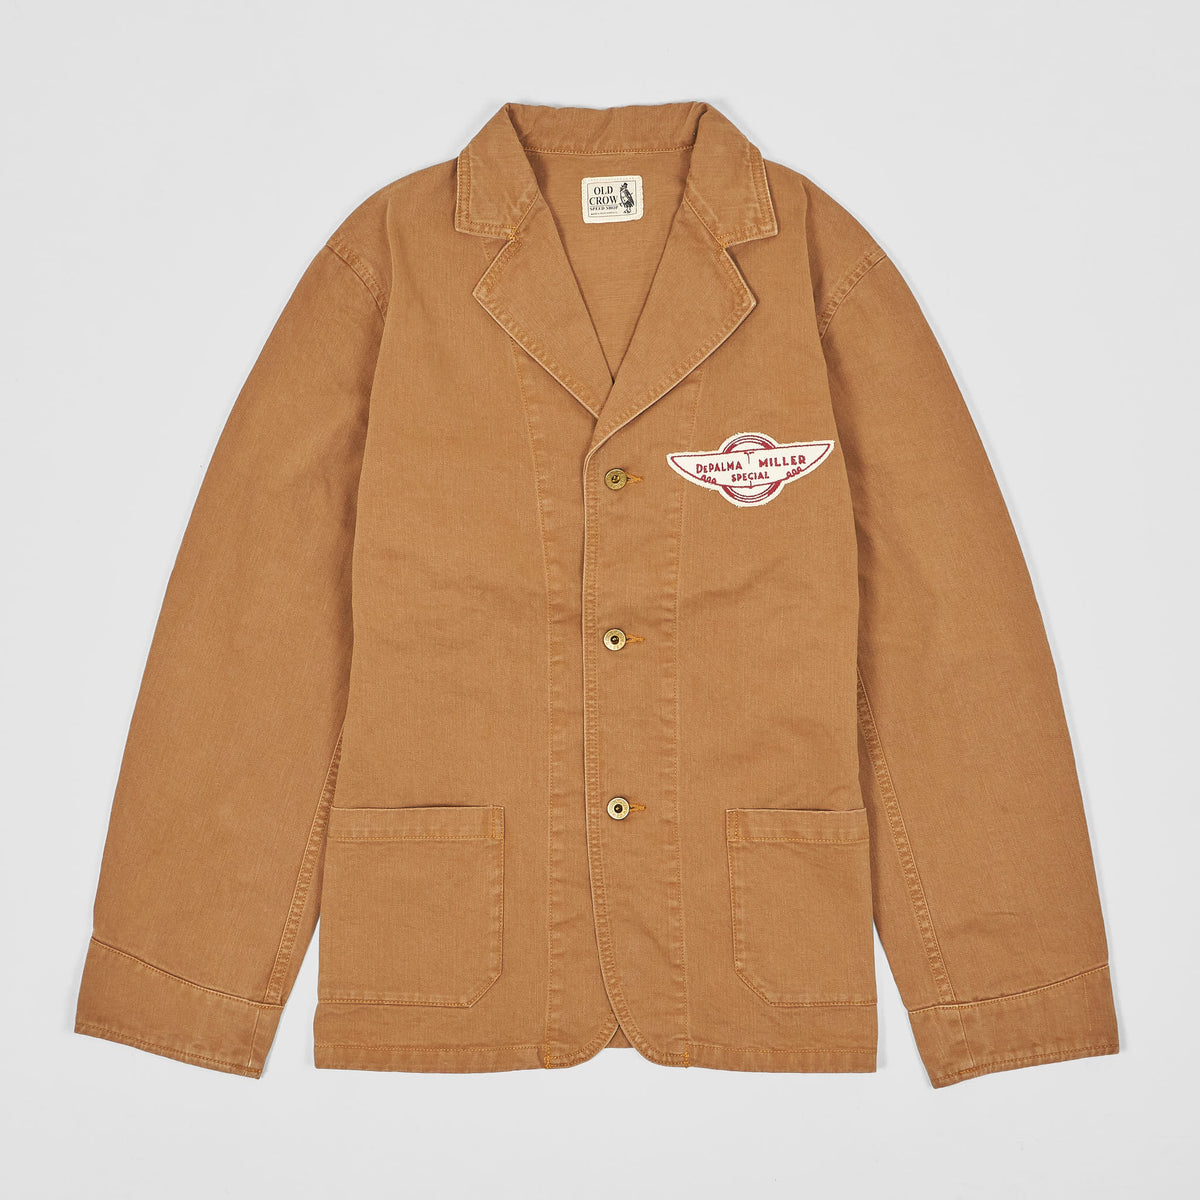 Old Crow Speed Shop by Glad Hand &amp; Co. DePalmer Miller Special Work Jacket